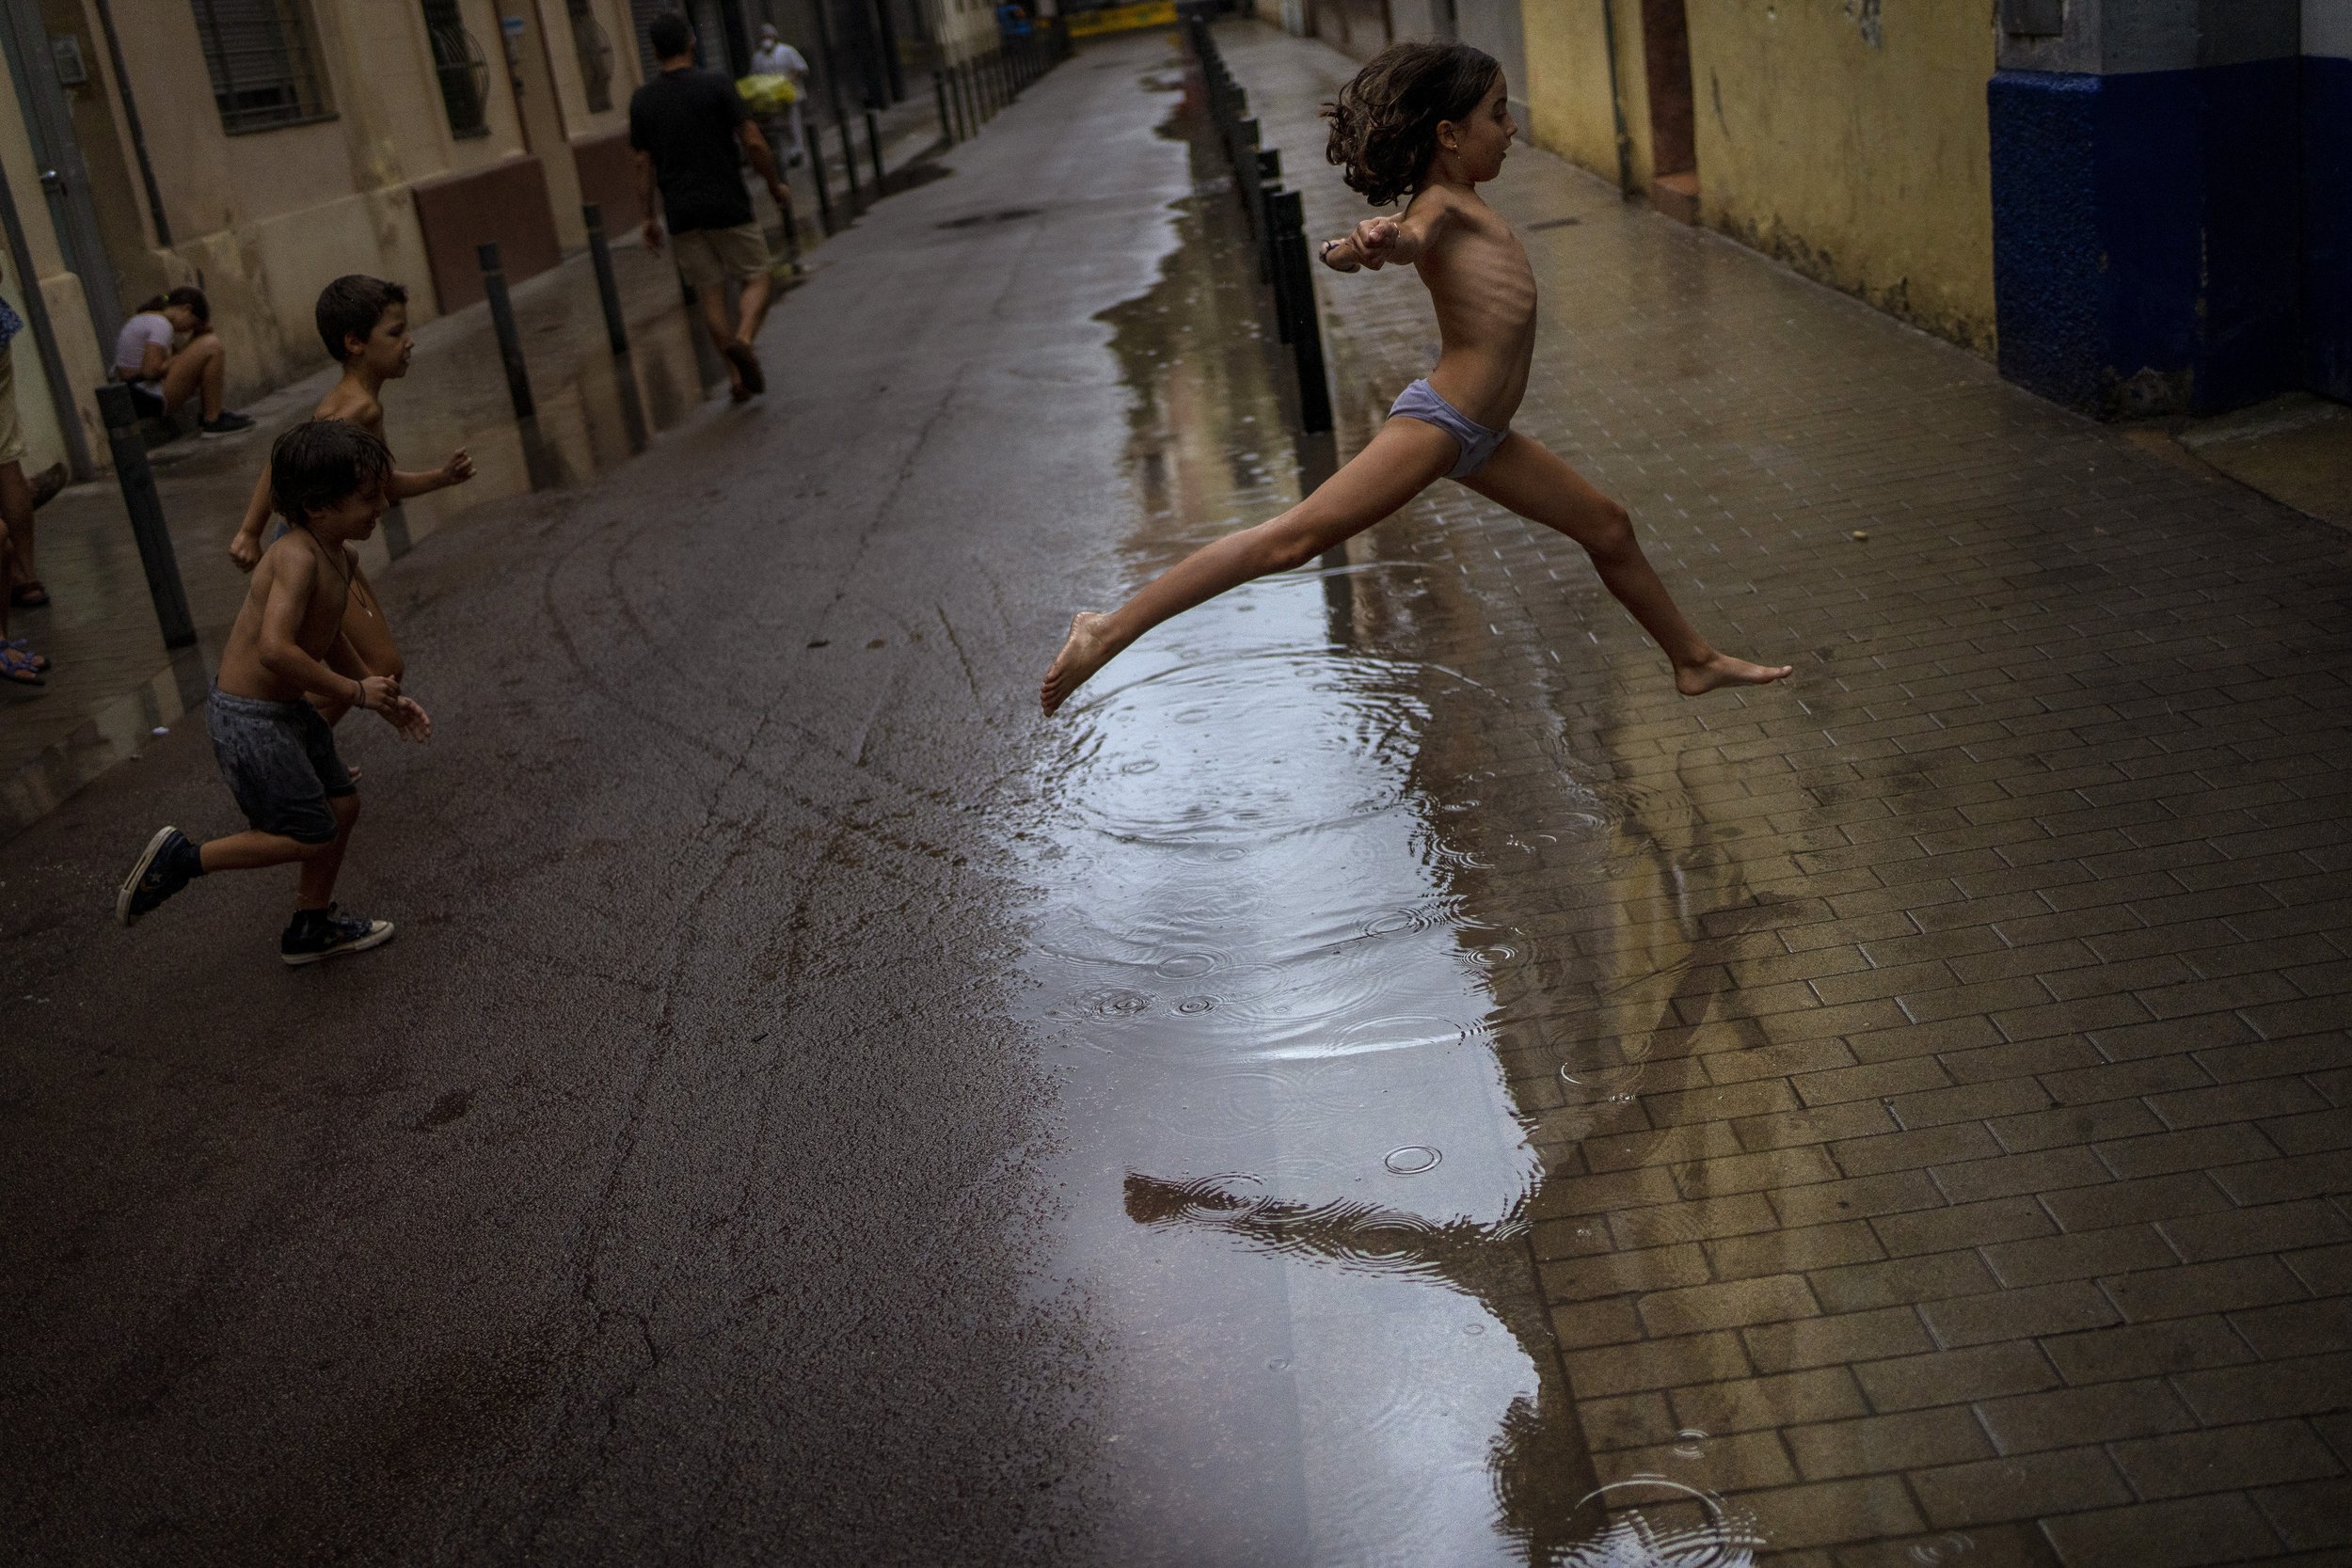  Children jump over a puddle of water as they play during a rainstorm on a street in Barcelona, Spain, on Sept. 18, 2021. (AP Photo/Emilio Morenatti) 